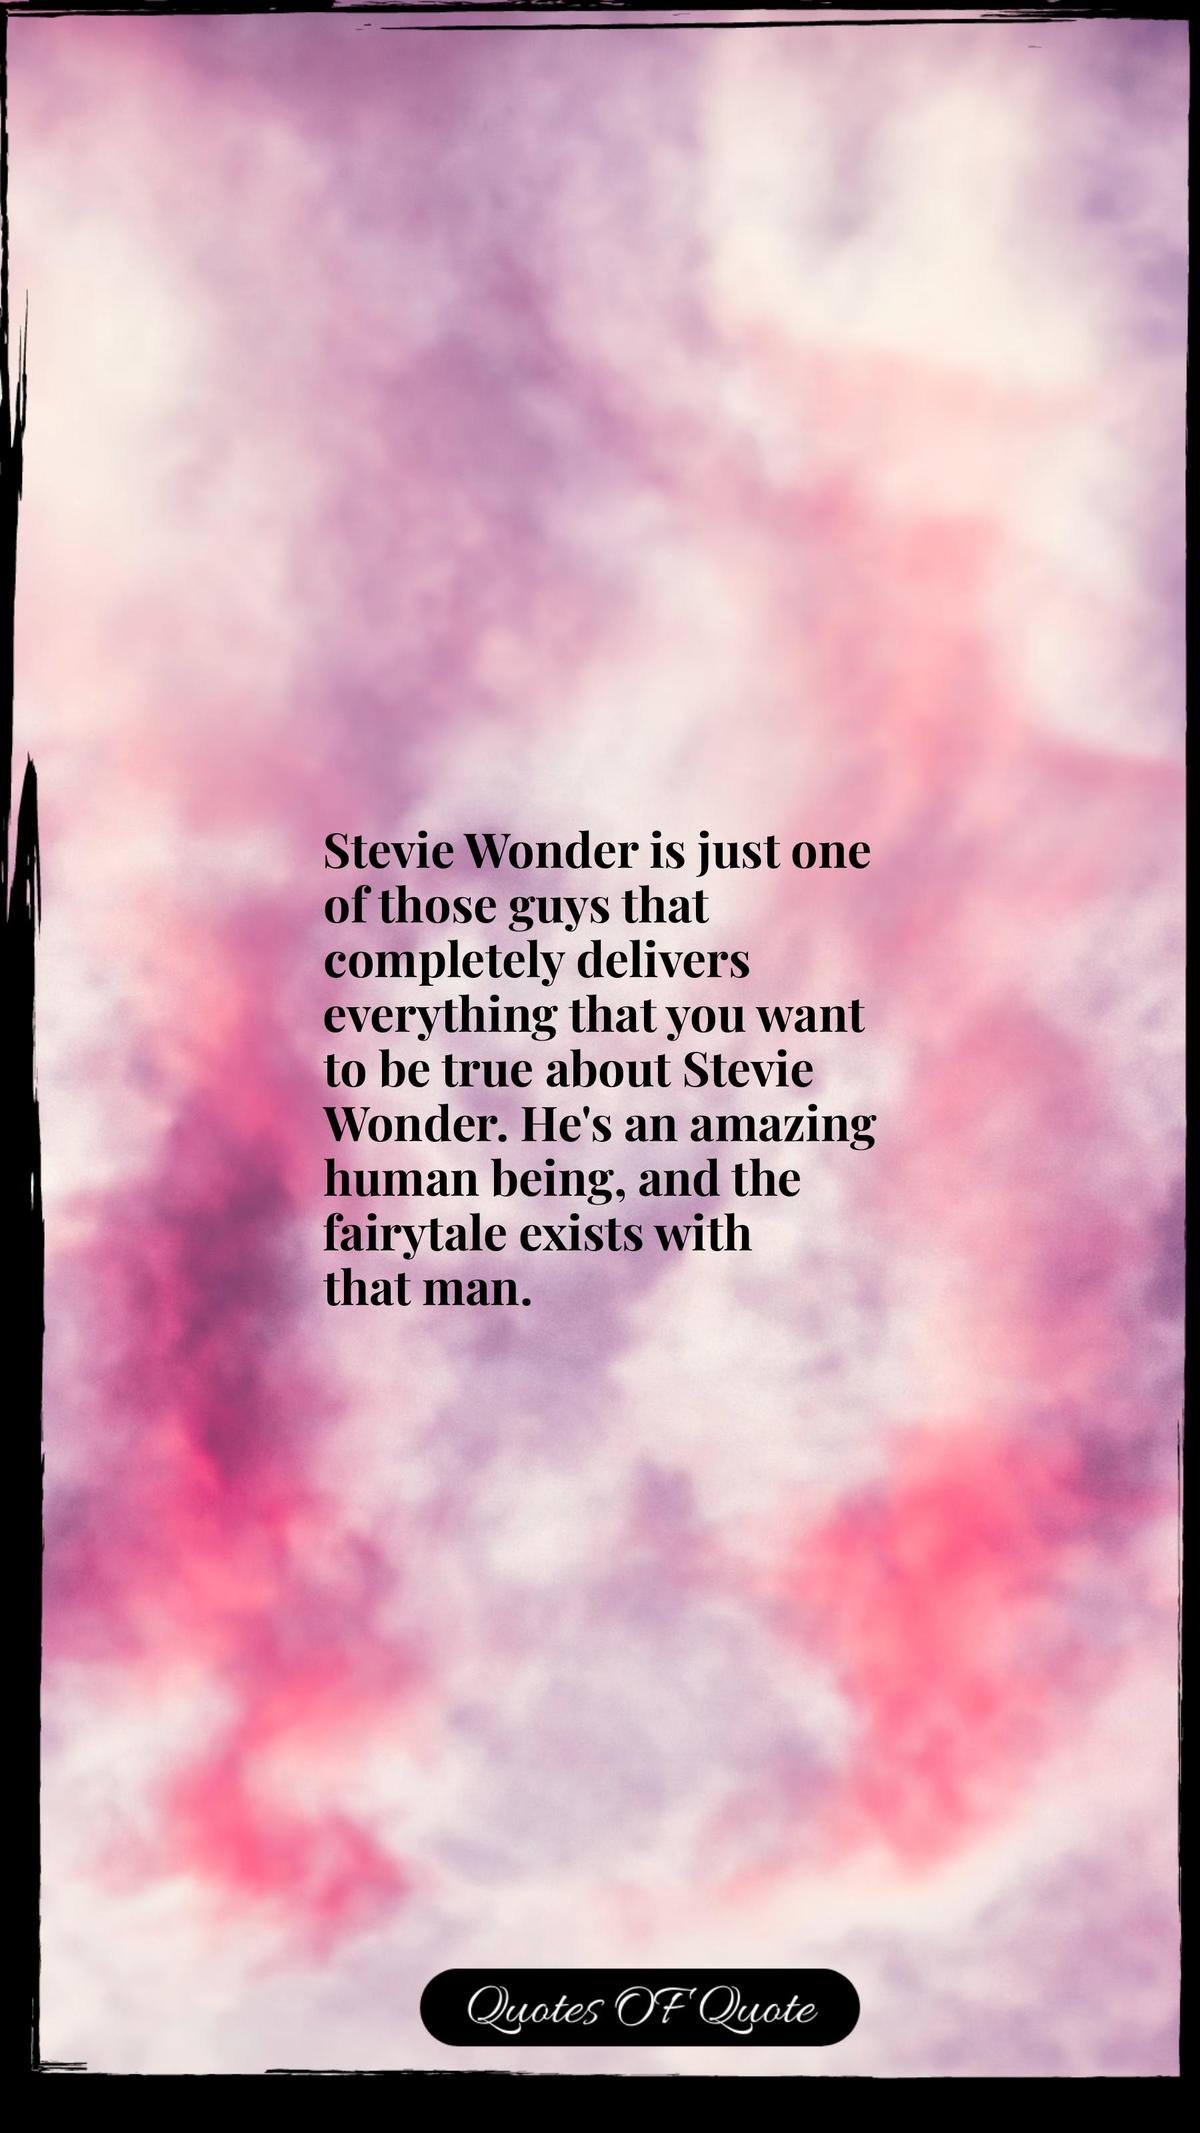 Stevie Wonder is just one of those guys that completely delivers everything that you want to be true about Stevie Wonder. He's an amazing human being, and the fairytale exists with that man.